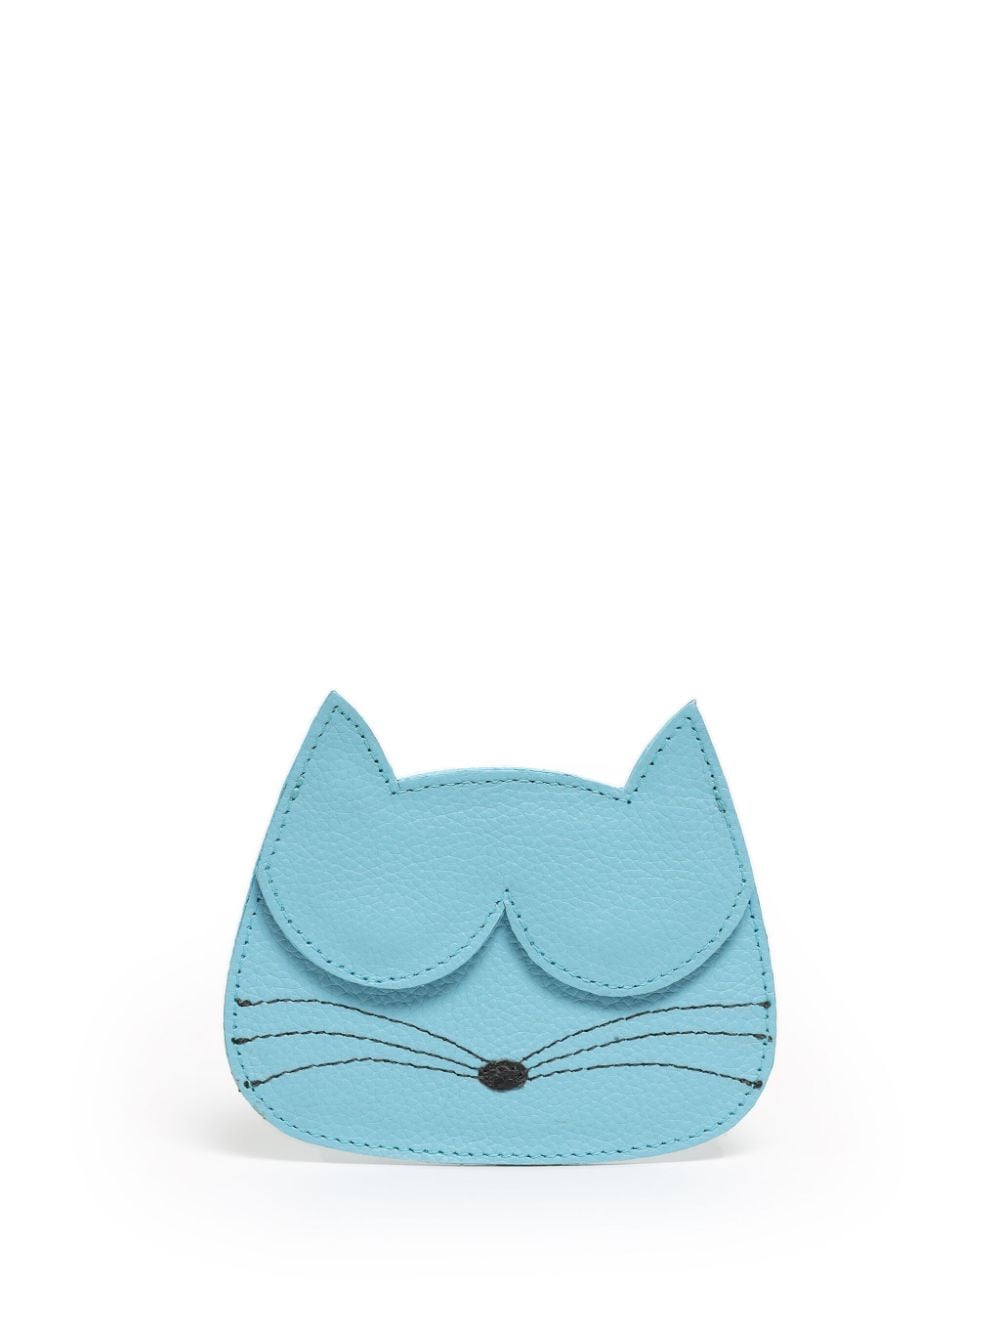 cat-shaped leather wallet